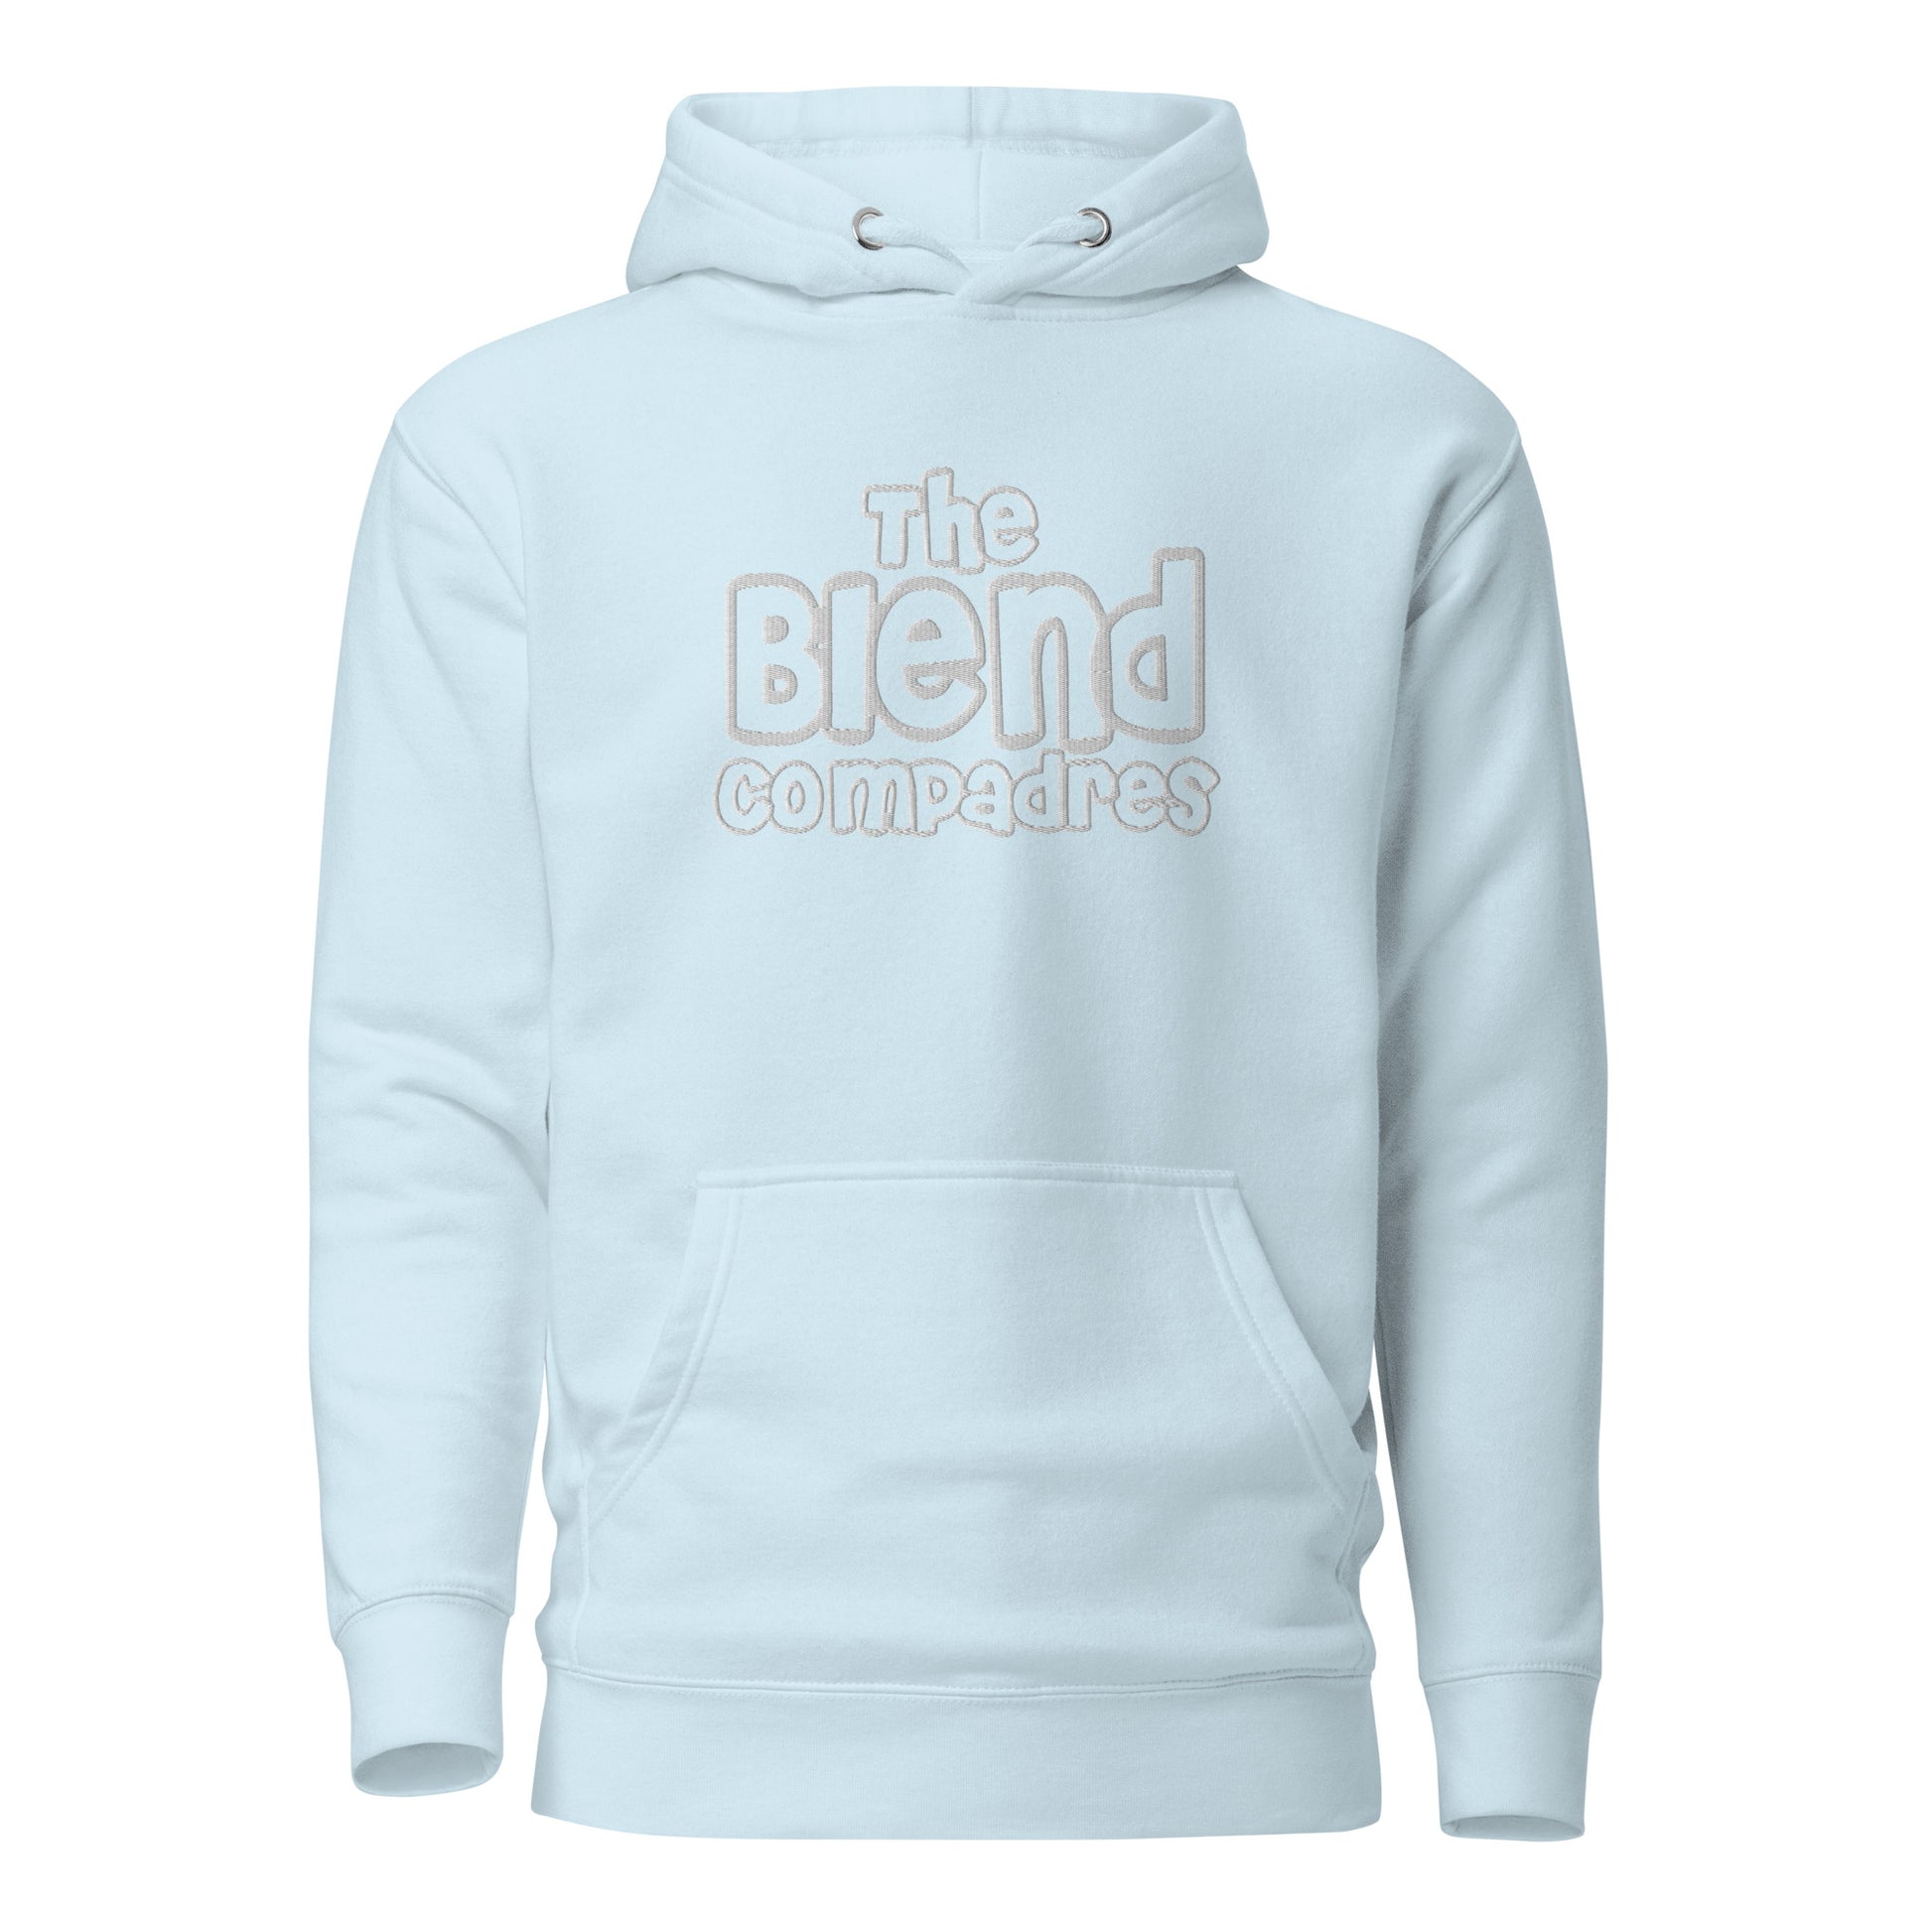 The Blend Compadres Unisex Hoodie - Another Bodega